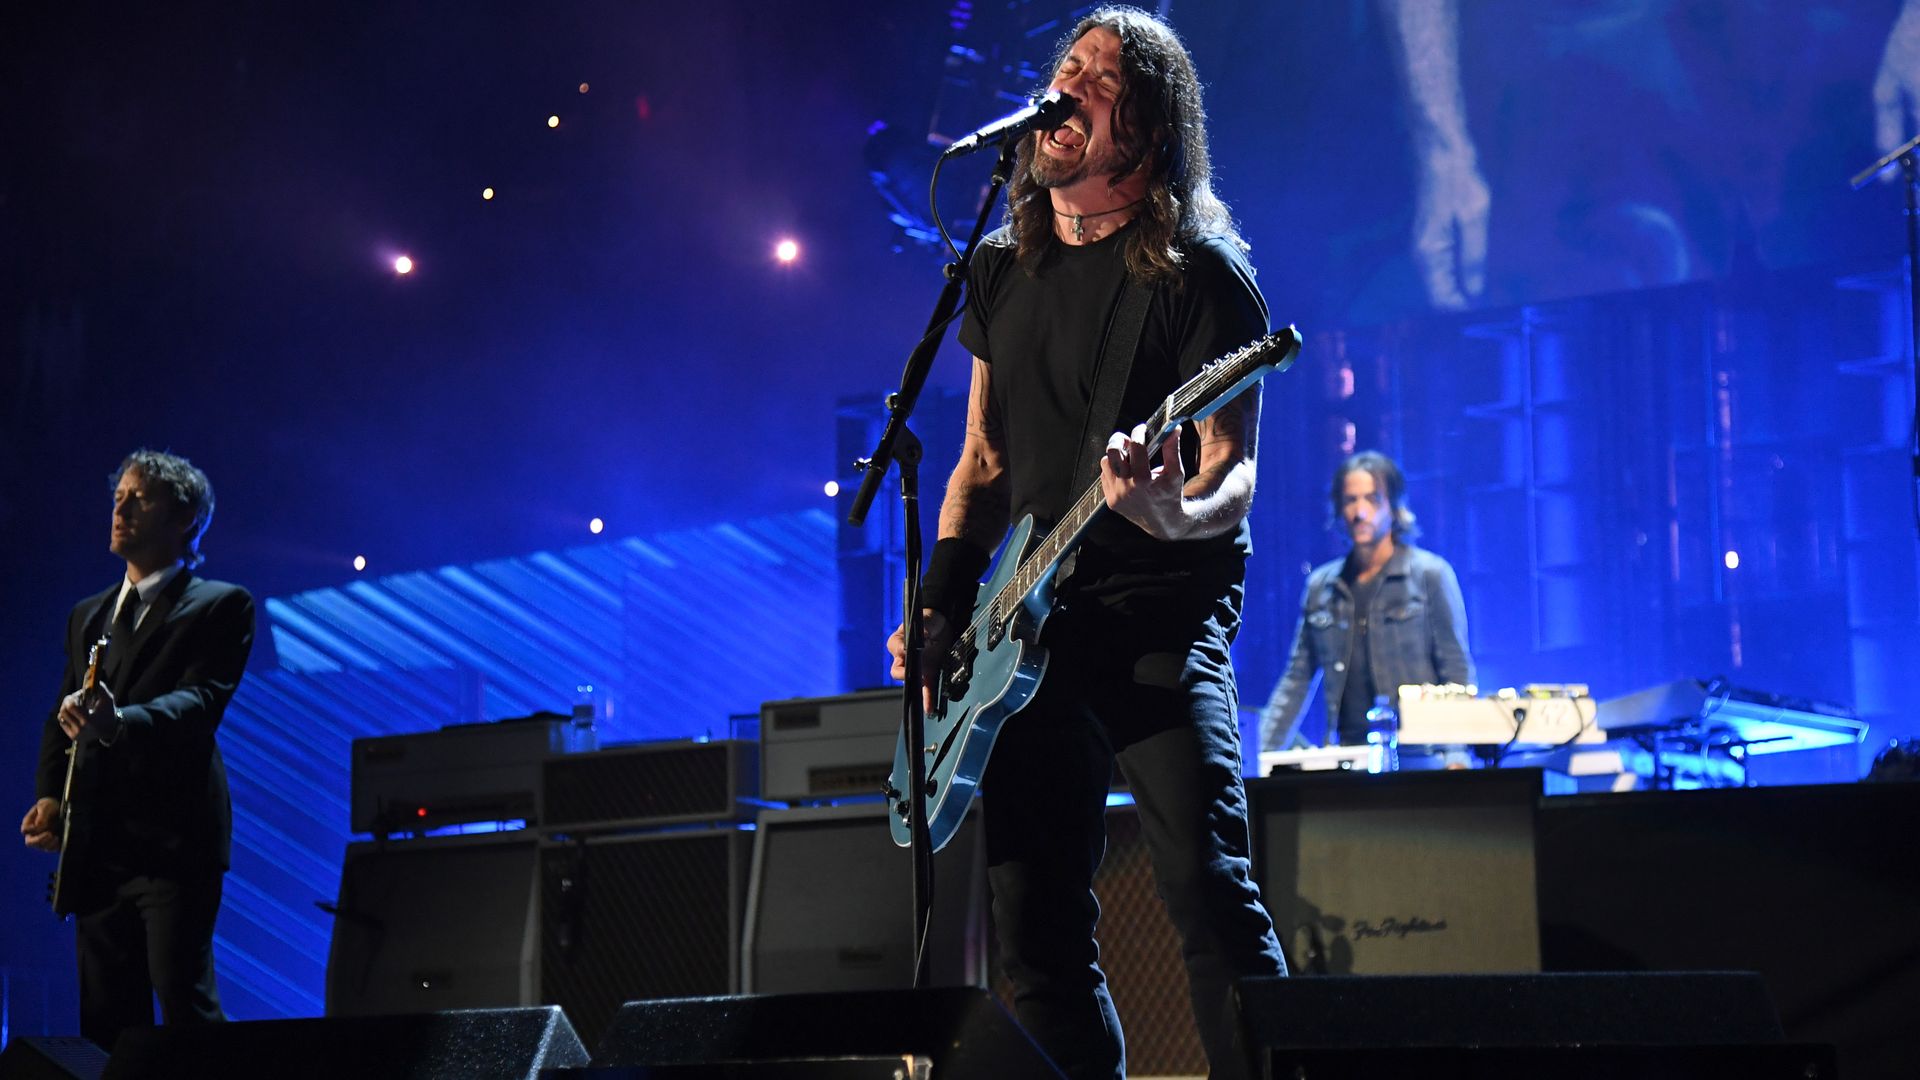 Dave Grohl of the Foo Fighters singing and playing a guitar at the Rock & Roll Hall of Fame Induction Ceremony.